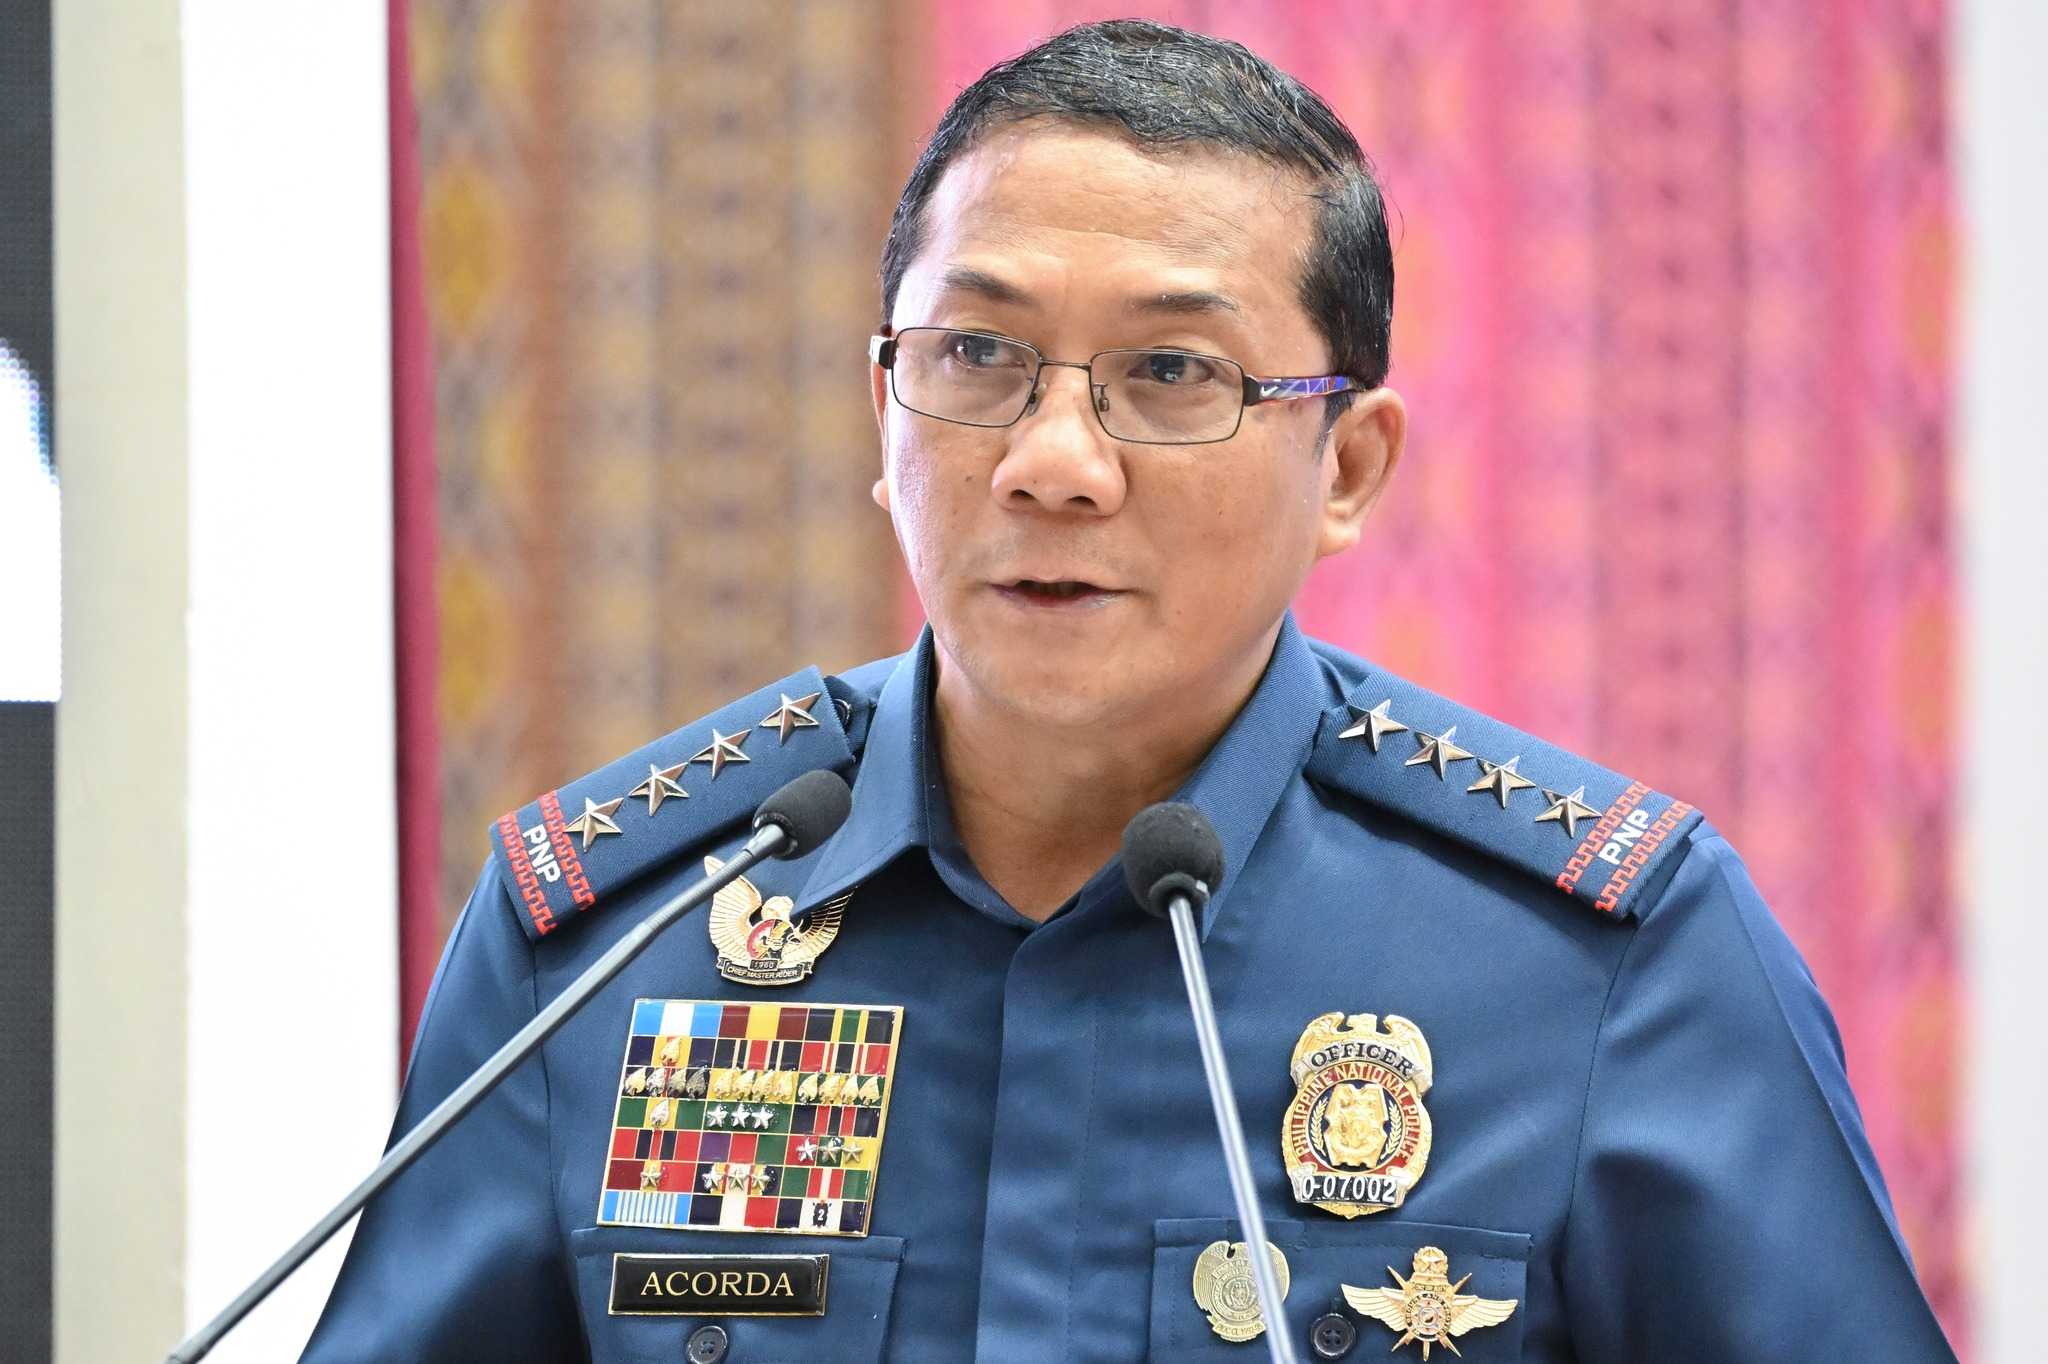 PNP wants Malacañang to clarify resignation of 18 cops